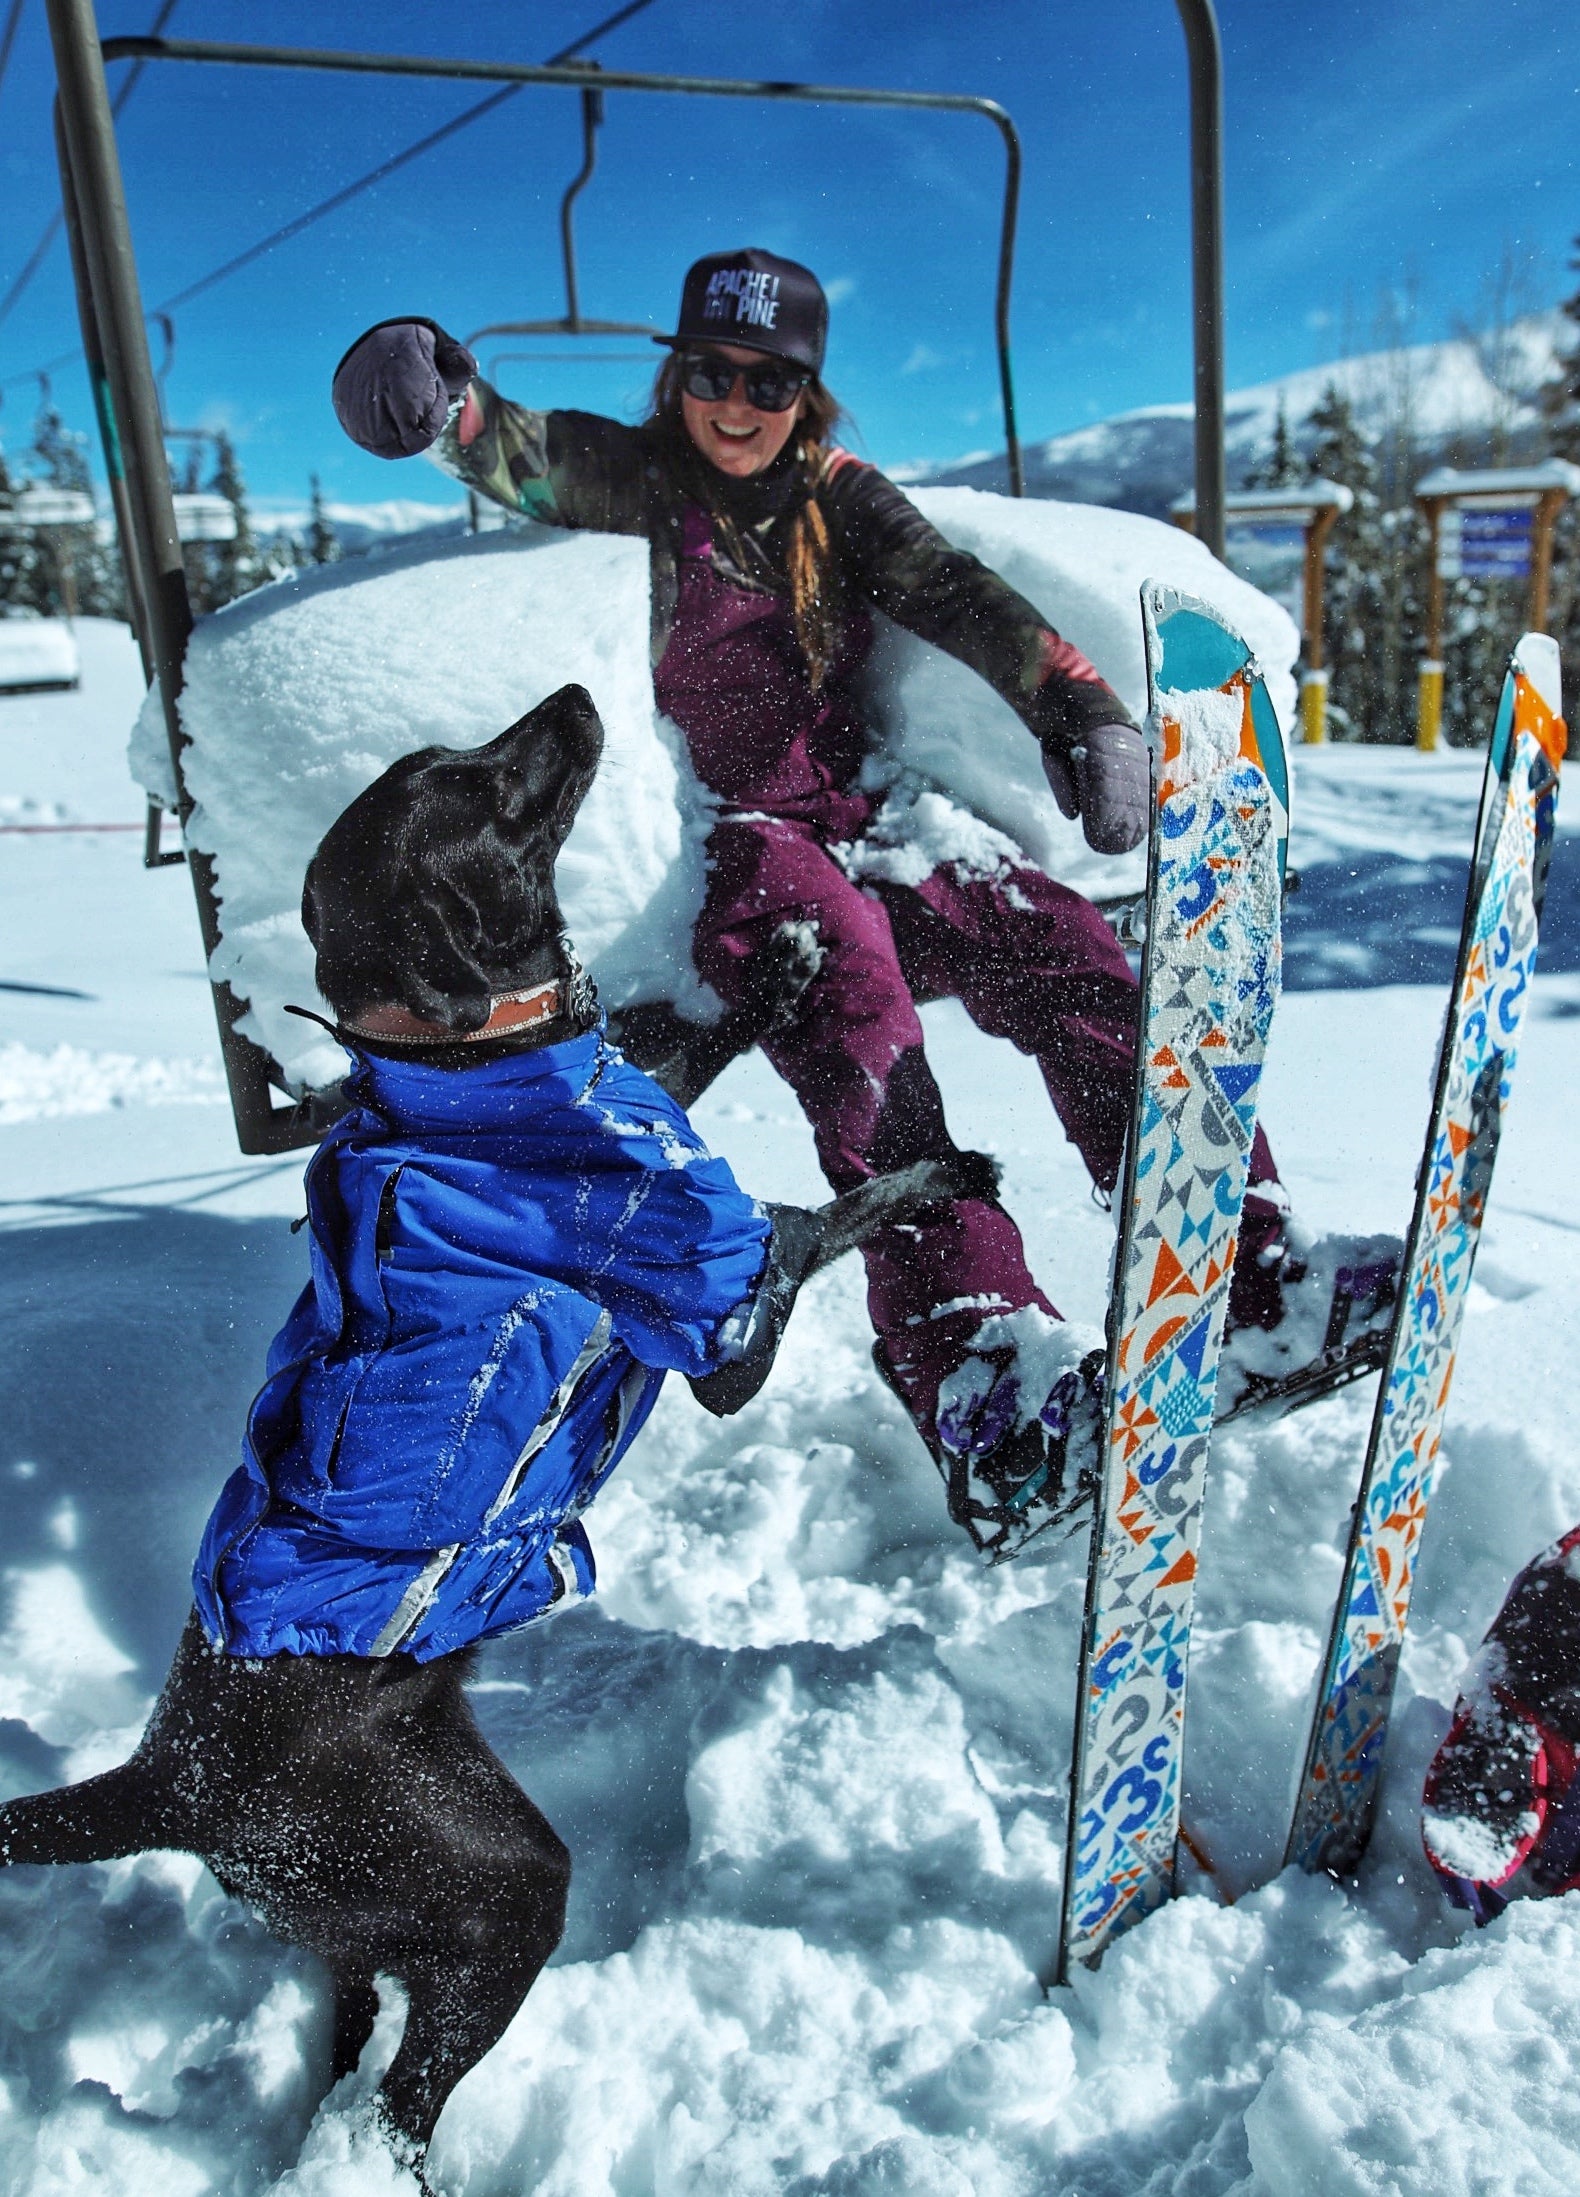 Leanne gets on a ski lift while her dog, Stout, looks up at her from the snow. 